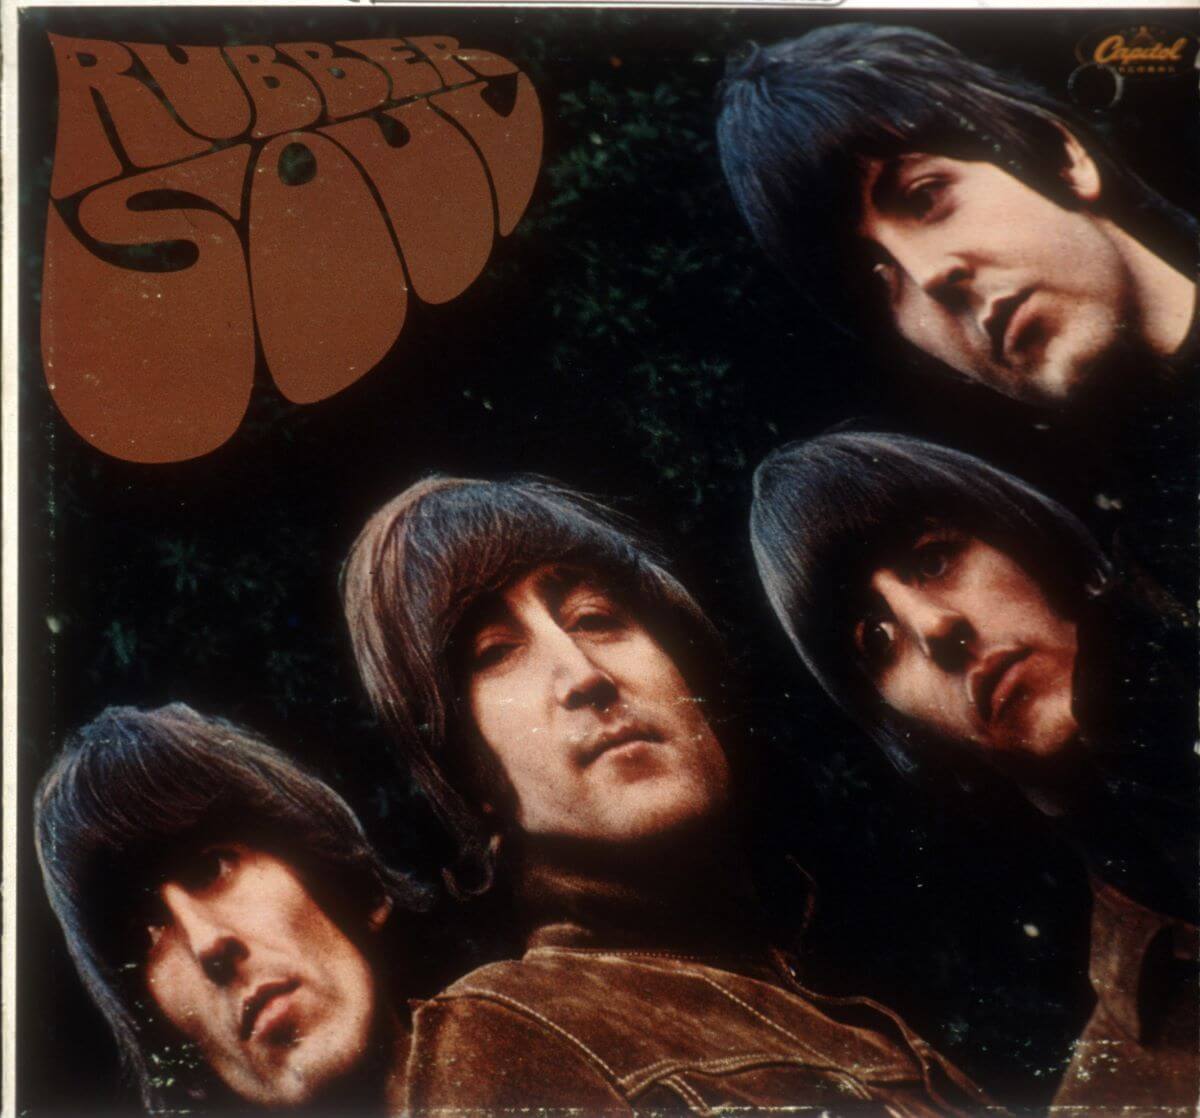 The album cover for The Beatles' 'Rubber Soul.' George Harrison, John Lennon, Ringo Starr, and Paul McCartney pose in a diagonal line across the cover. 'Rubber Soul' is in the upper right corner.